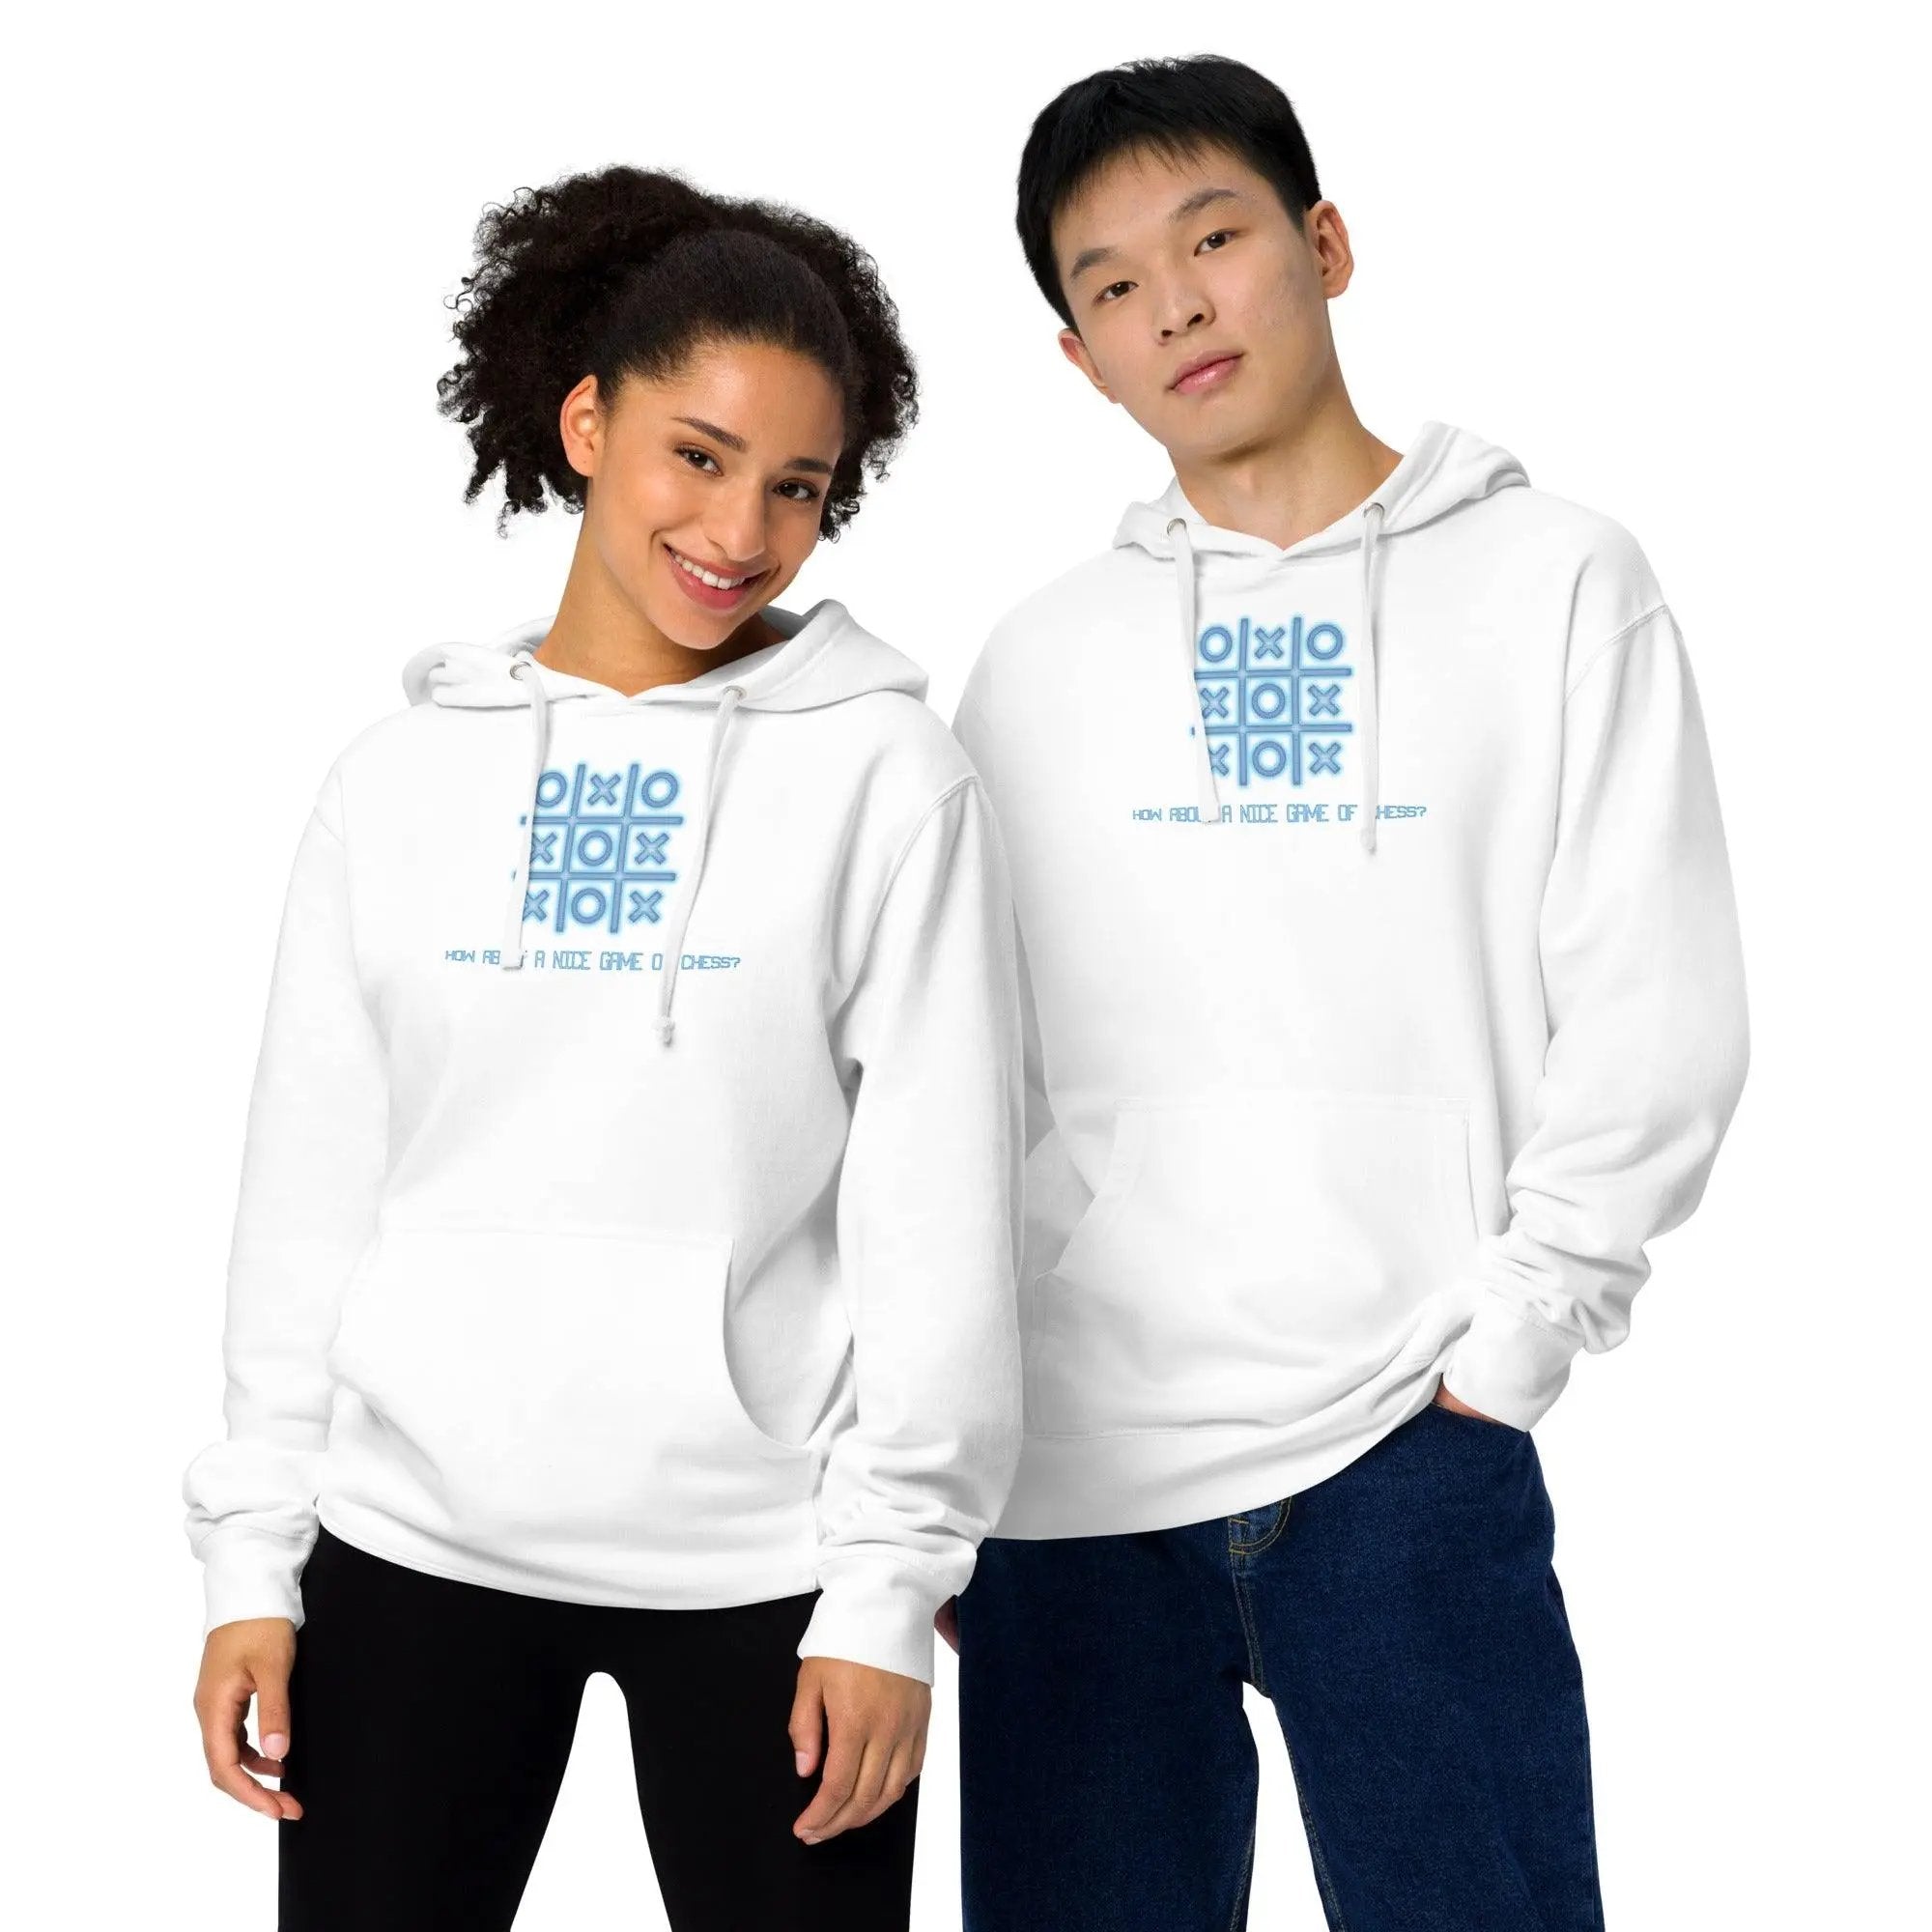 How About a Nice Game Of Chess? Unisex Hoodie